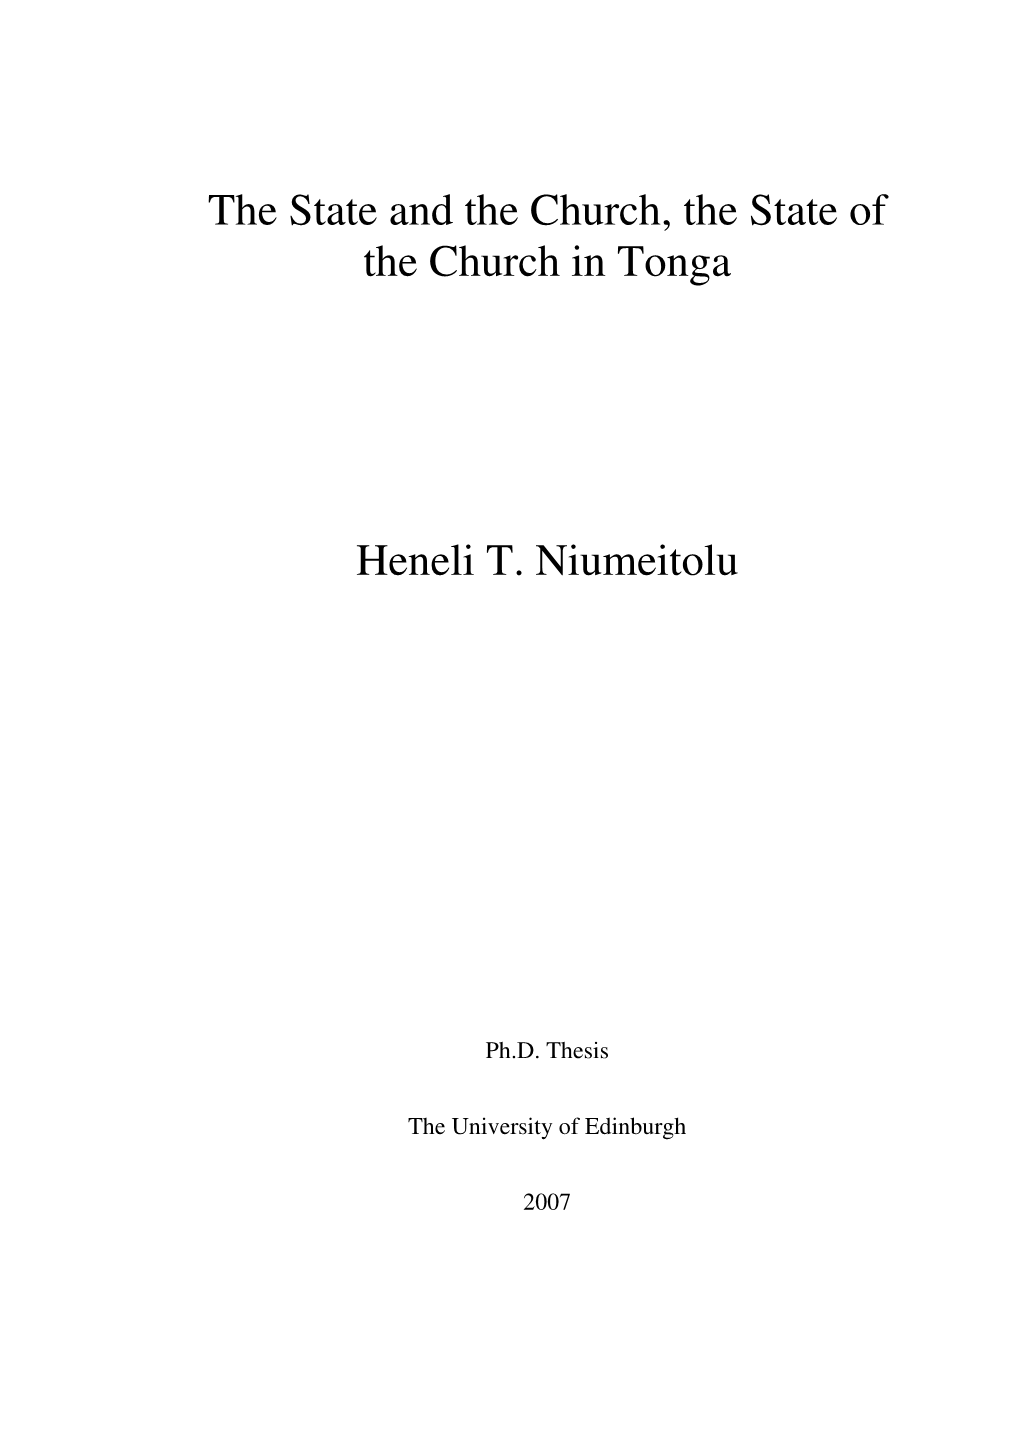 The State and the Church, the State of the Church in Tonga Heneli T